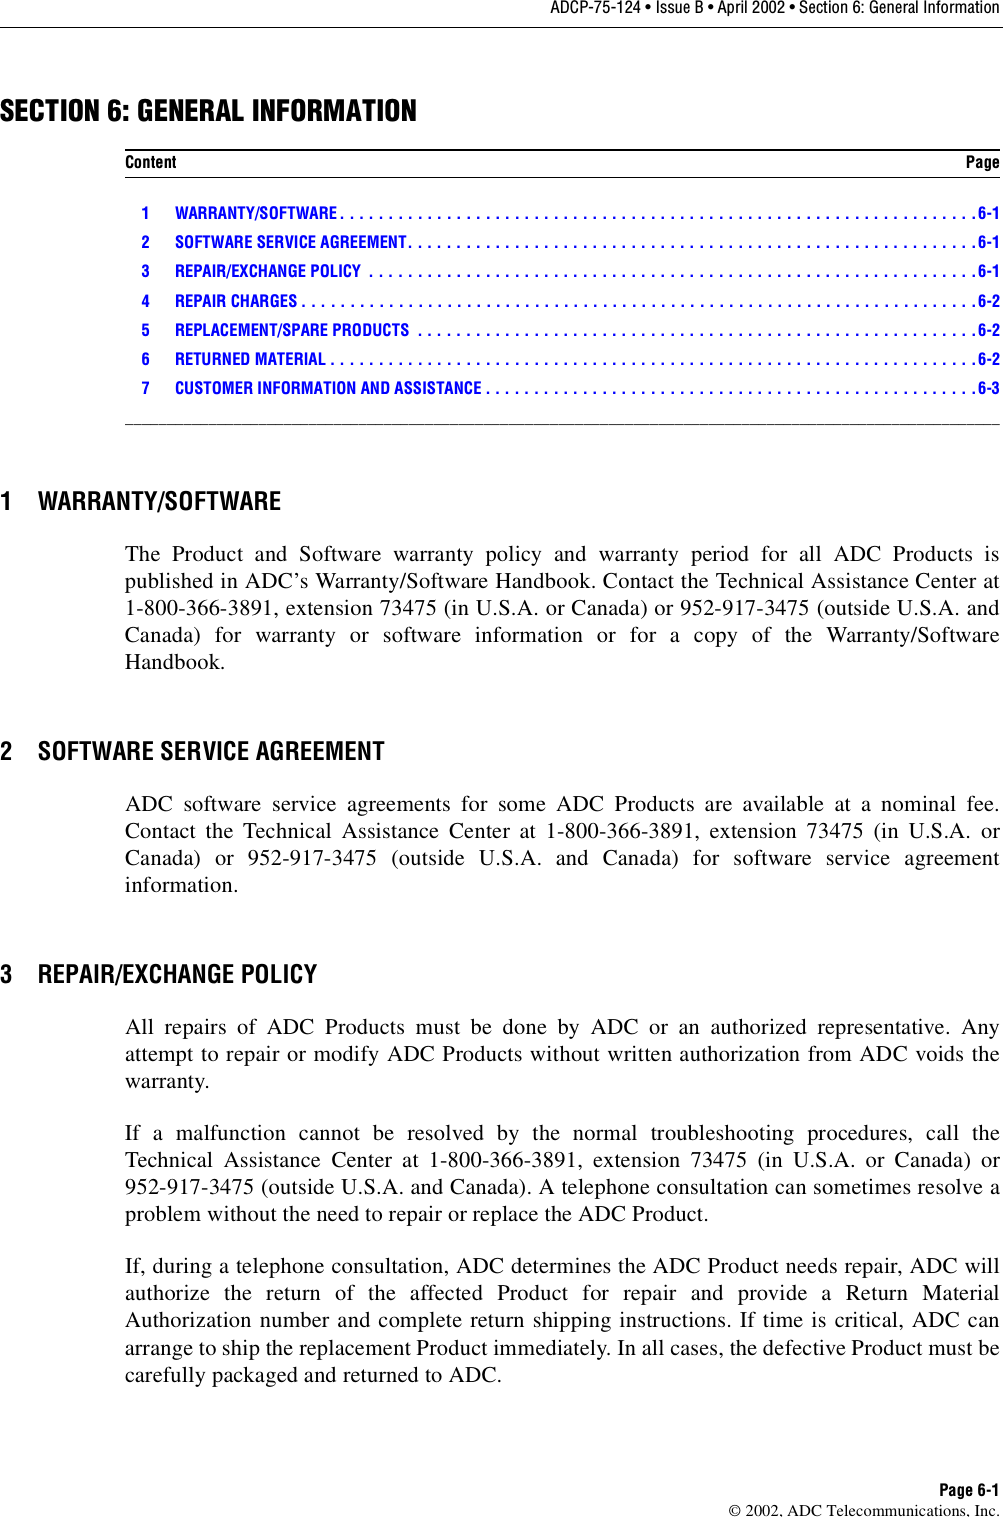 ADCP-75-124 • Issue B • April 2002 • Section 6: General InformationPage 6-1©2002, ADC Telecommunications, Inc.SECTION 6: GENERAL INFORMATION1 WARRANTY/SOFTWARE . . . . . . . . . . . . . . . . . . . . . . . . . . . . . . . . . . . . . . . . . . . . . . . . . . . . . . . . . . . . . . . . . .6-12 SOFTWARE SERVICE AGREEMENT. . . . . . . . . . . . . . . . . . . . . . . . . . . . . . . . . . . . . . . . . . . . . . . . . . . . . . . . . . .6-13 REPAIR/EXCHANGE POLICY  . . . . . . . . . . . . . . . . . . . . . . . . . . . . . . . . . . . . . . . . . . . . . . . . . . . . . . . . . . . . . . .6-14 REPAIR CHARGES . . . . . . . . . . . . . . . . . . . . . . . . . . . . . . . . . . . . . . . . . . . . . . . . . . . . . . . . . . . . . . . . . . . . . .6-25 REPLACEMENT/SPARE PRODUCTS  . . . . . . . . . . . . . . . . . . . . . . . . . . . . . . . . . . . . . . . . . . . . . . . . . . . . . . . . . .6-26 RETURNED MATERIAL . . . . . . . . . . . . . . . . . . . . . . . . . . . . . . . . . . . . . . . . . . . . . . . . . . . . . . . . . . . . . . . . . . .6-27 CUSTOMER INFORMATION AND ASSISTANCE . . . . . . . . . . . . . . . . . . . . . . . . . . . . . . . . . . . . . . . . . . . . . . . . . . .6-3_________________________________________________________________________________________________________1 WARRANTY/SOFTWAREThe Product and Software warranty policy and warranty period for all ADC Products ispublished in ADC’s Warranty/Software Handbook. Contact the Technical Assistance Center at1-800-366-3891, extension 73475 (in U.S.A. or Canada) or 952-917-3475 (outside U.S.A. andCanada) for warranty or software information or for acopy of the Warranty/SoftwareHandbook.2 SOFTWARE SERVICE AGREEMENTADC software service agreements for some ADC Products are available at anominal fee.Contact the Technical Assistance Center at 1-800-366-3891, extension 73475 (in U.S.A. orCanada) or 952-917-3475 (outside U.S.A. and Canada) for software service agreementinformation.3 REPAIR/EXCHANGE POLICYAll repairs of ADC Products must be done by ADC or an authorized representative. Anyattempt to repair or modify ADC Products without written authorization from ADC voids thewarranty.If amalfunction cannot be resolved by the normal troubleshooting procedures, call theTechnical Assistance Center at 1-800-366-3891, extension 73475 (in U.S.A. or Canada) or952-917-3475 (outside U.S.A. and Canada). Atelephone consultation can sometimes resolve aproblem without the need to repair or replace the ADC Product.If, during atelephone consultation, ADC determines the ADC Product needs repair, ADC willauthorize the return of the affected Product for repair and provide aReturn MaterialAuthorization number and complete return shipping instructions. If time is critical, ADC canarrange to ship the replacement Product immediately. In all cases, the defective Product must becarefully packaged and returned to ADC.Content Page